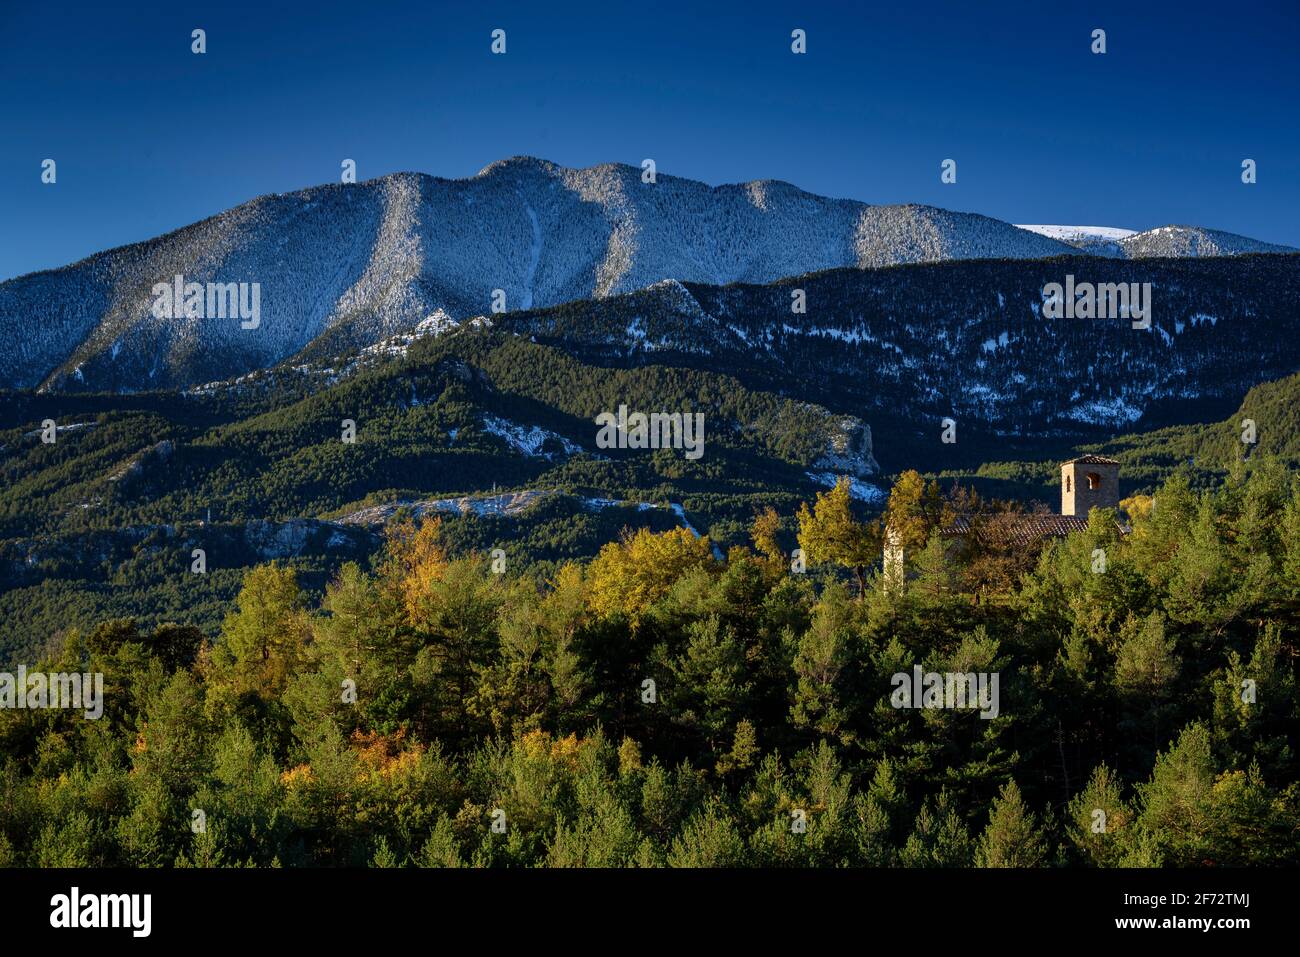 Serra d'Ensija range and Sant Miquel de Turbians church, in autumn, after a snowfall. Seen from near to Albert Arilla viewpoint, in Gisclareny (Spain) Stock Photo